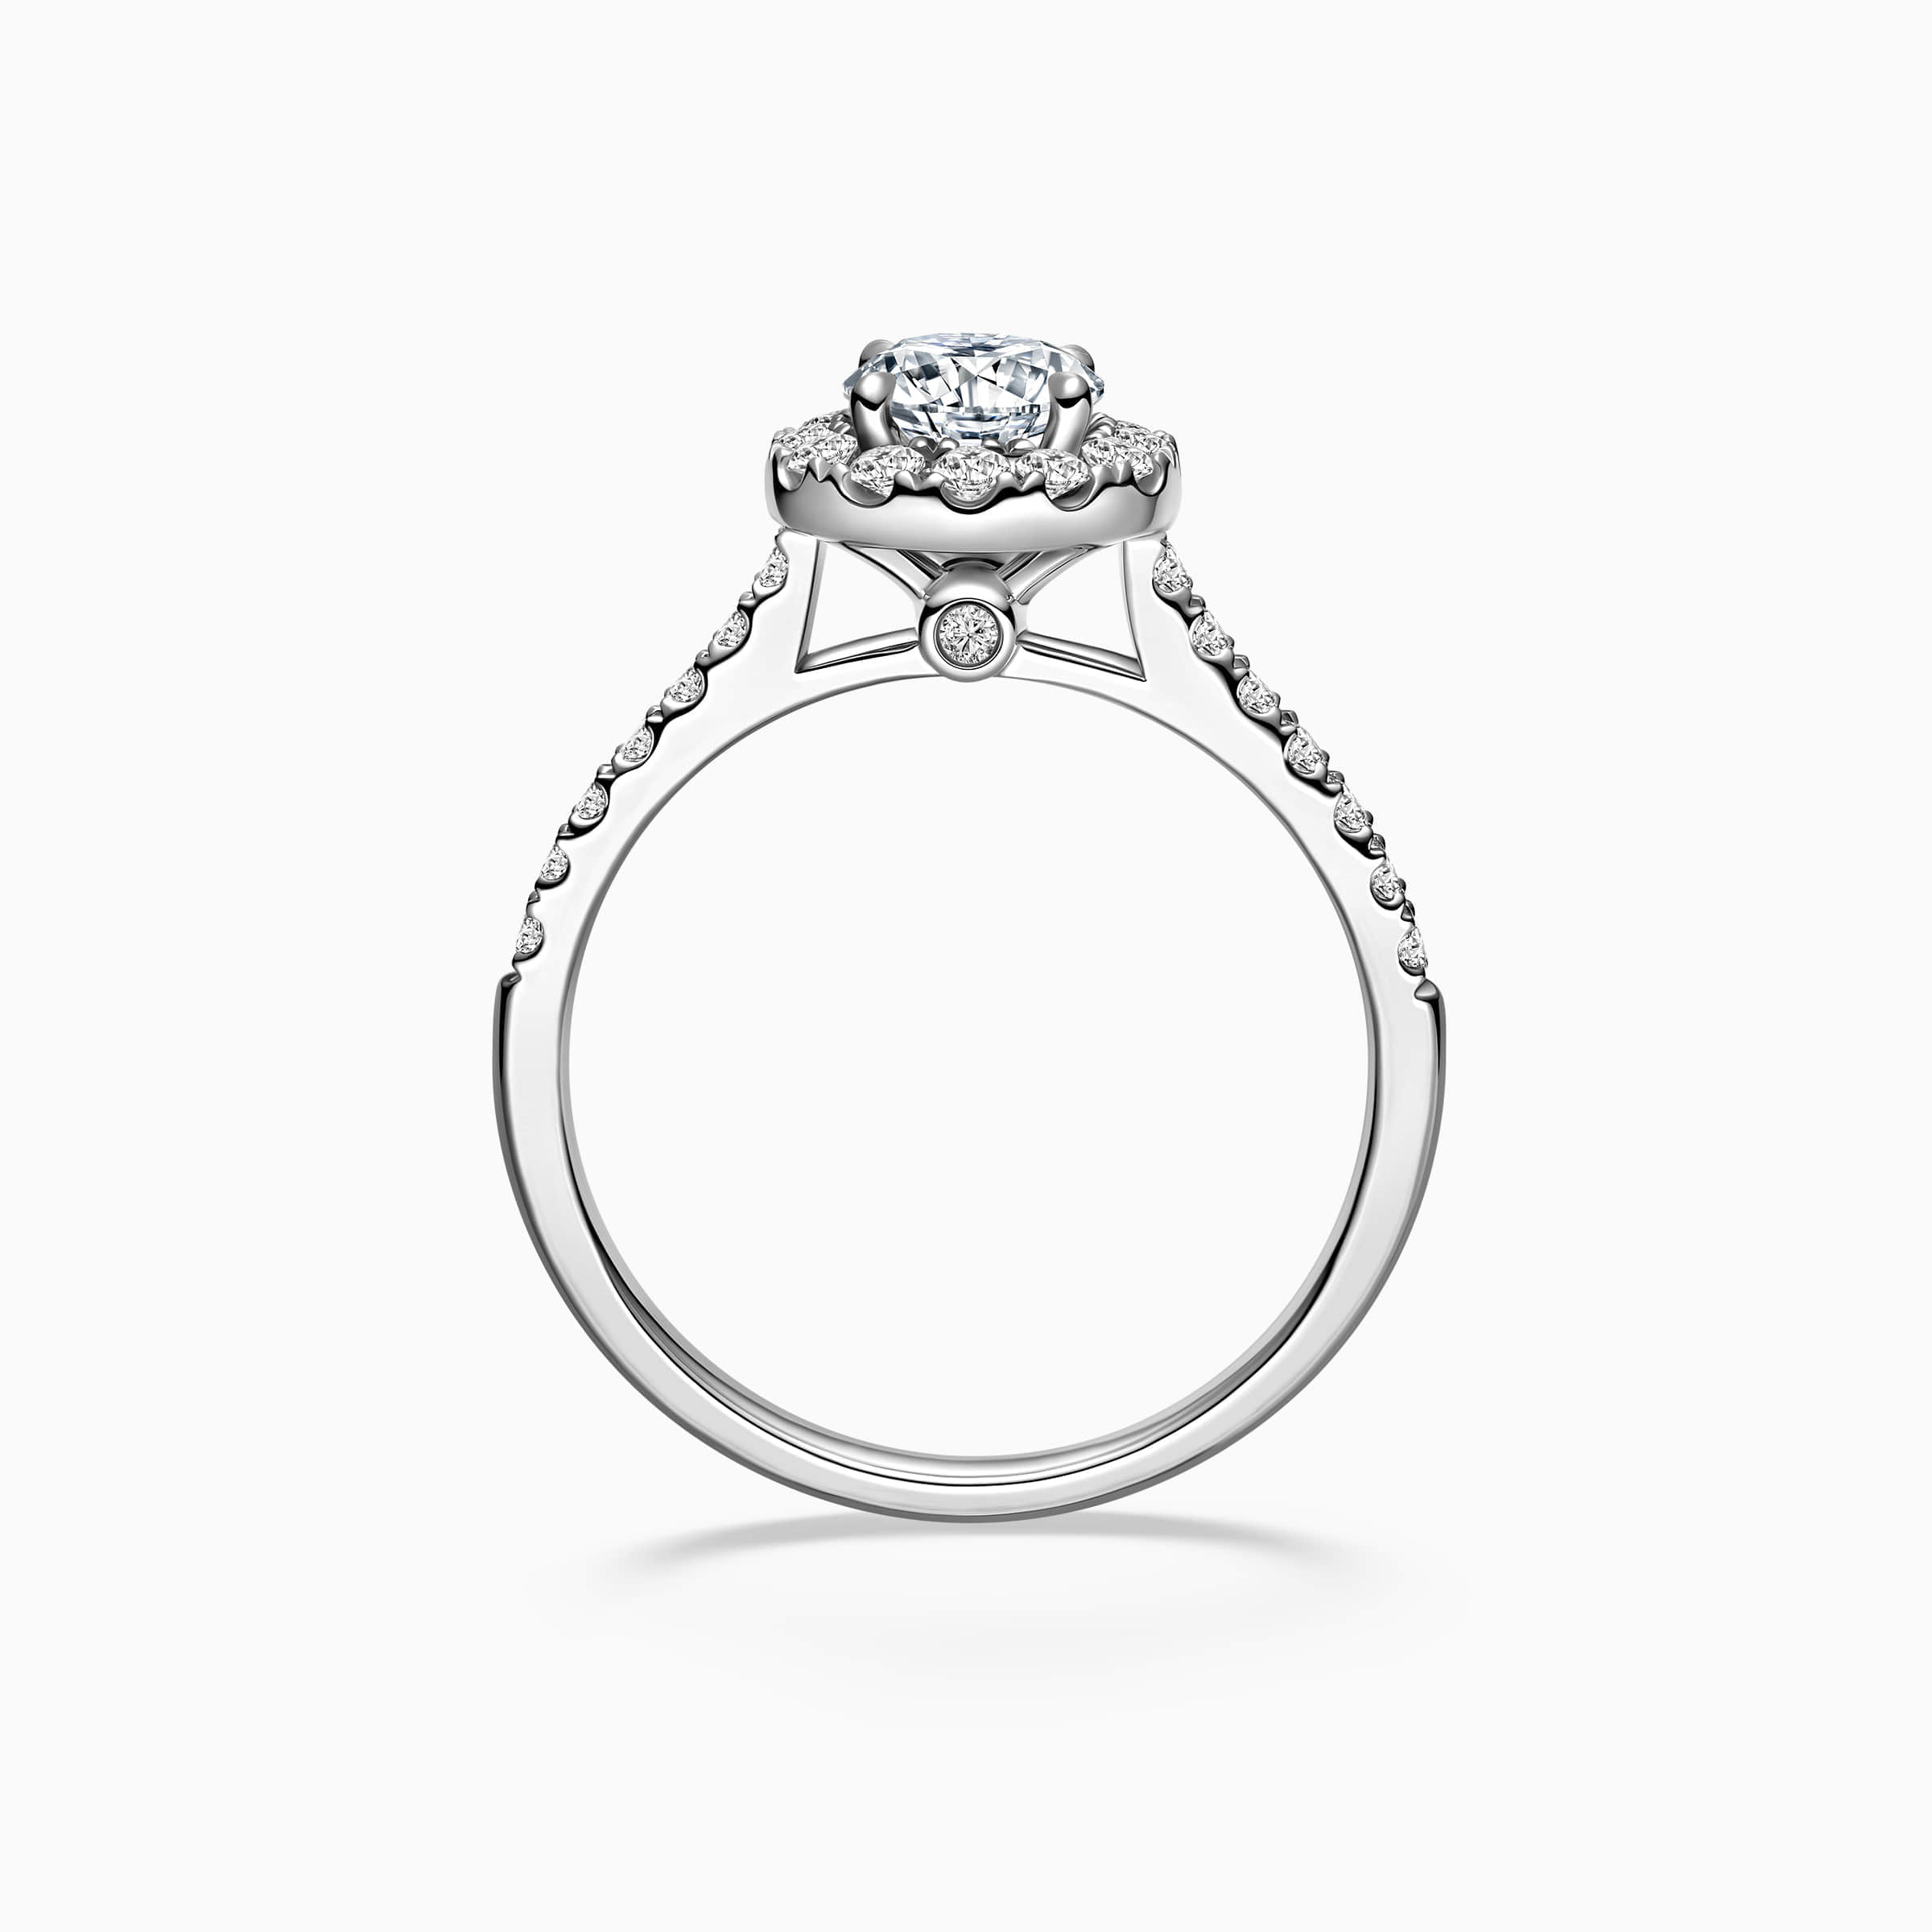 Darry Ring round halo engagement ring